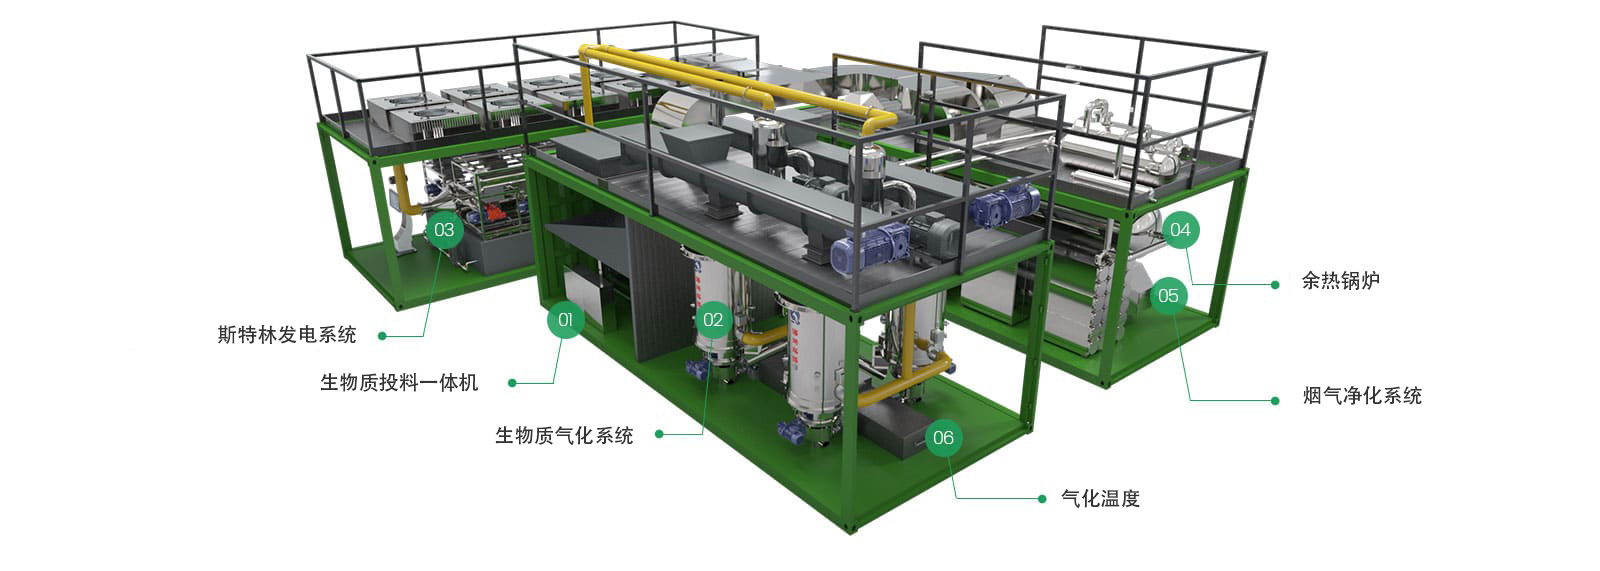 Biomass Distributed Energy Station